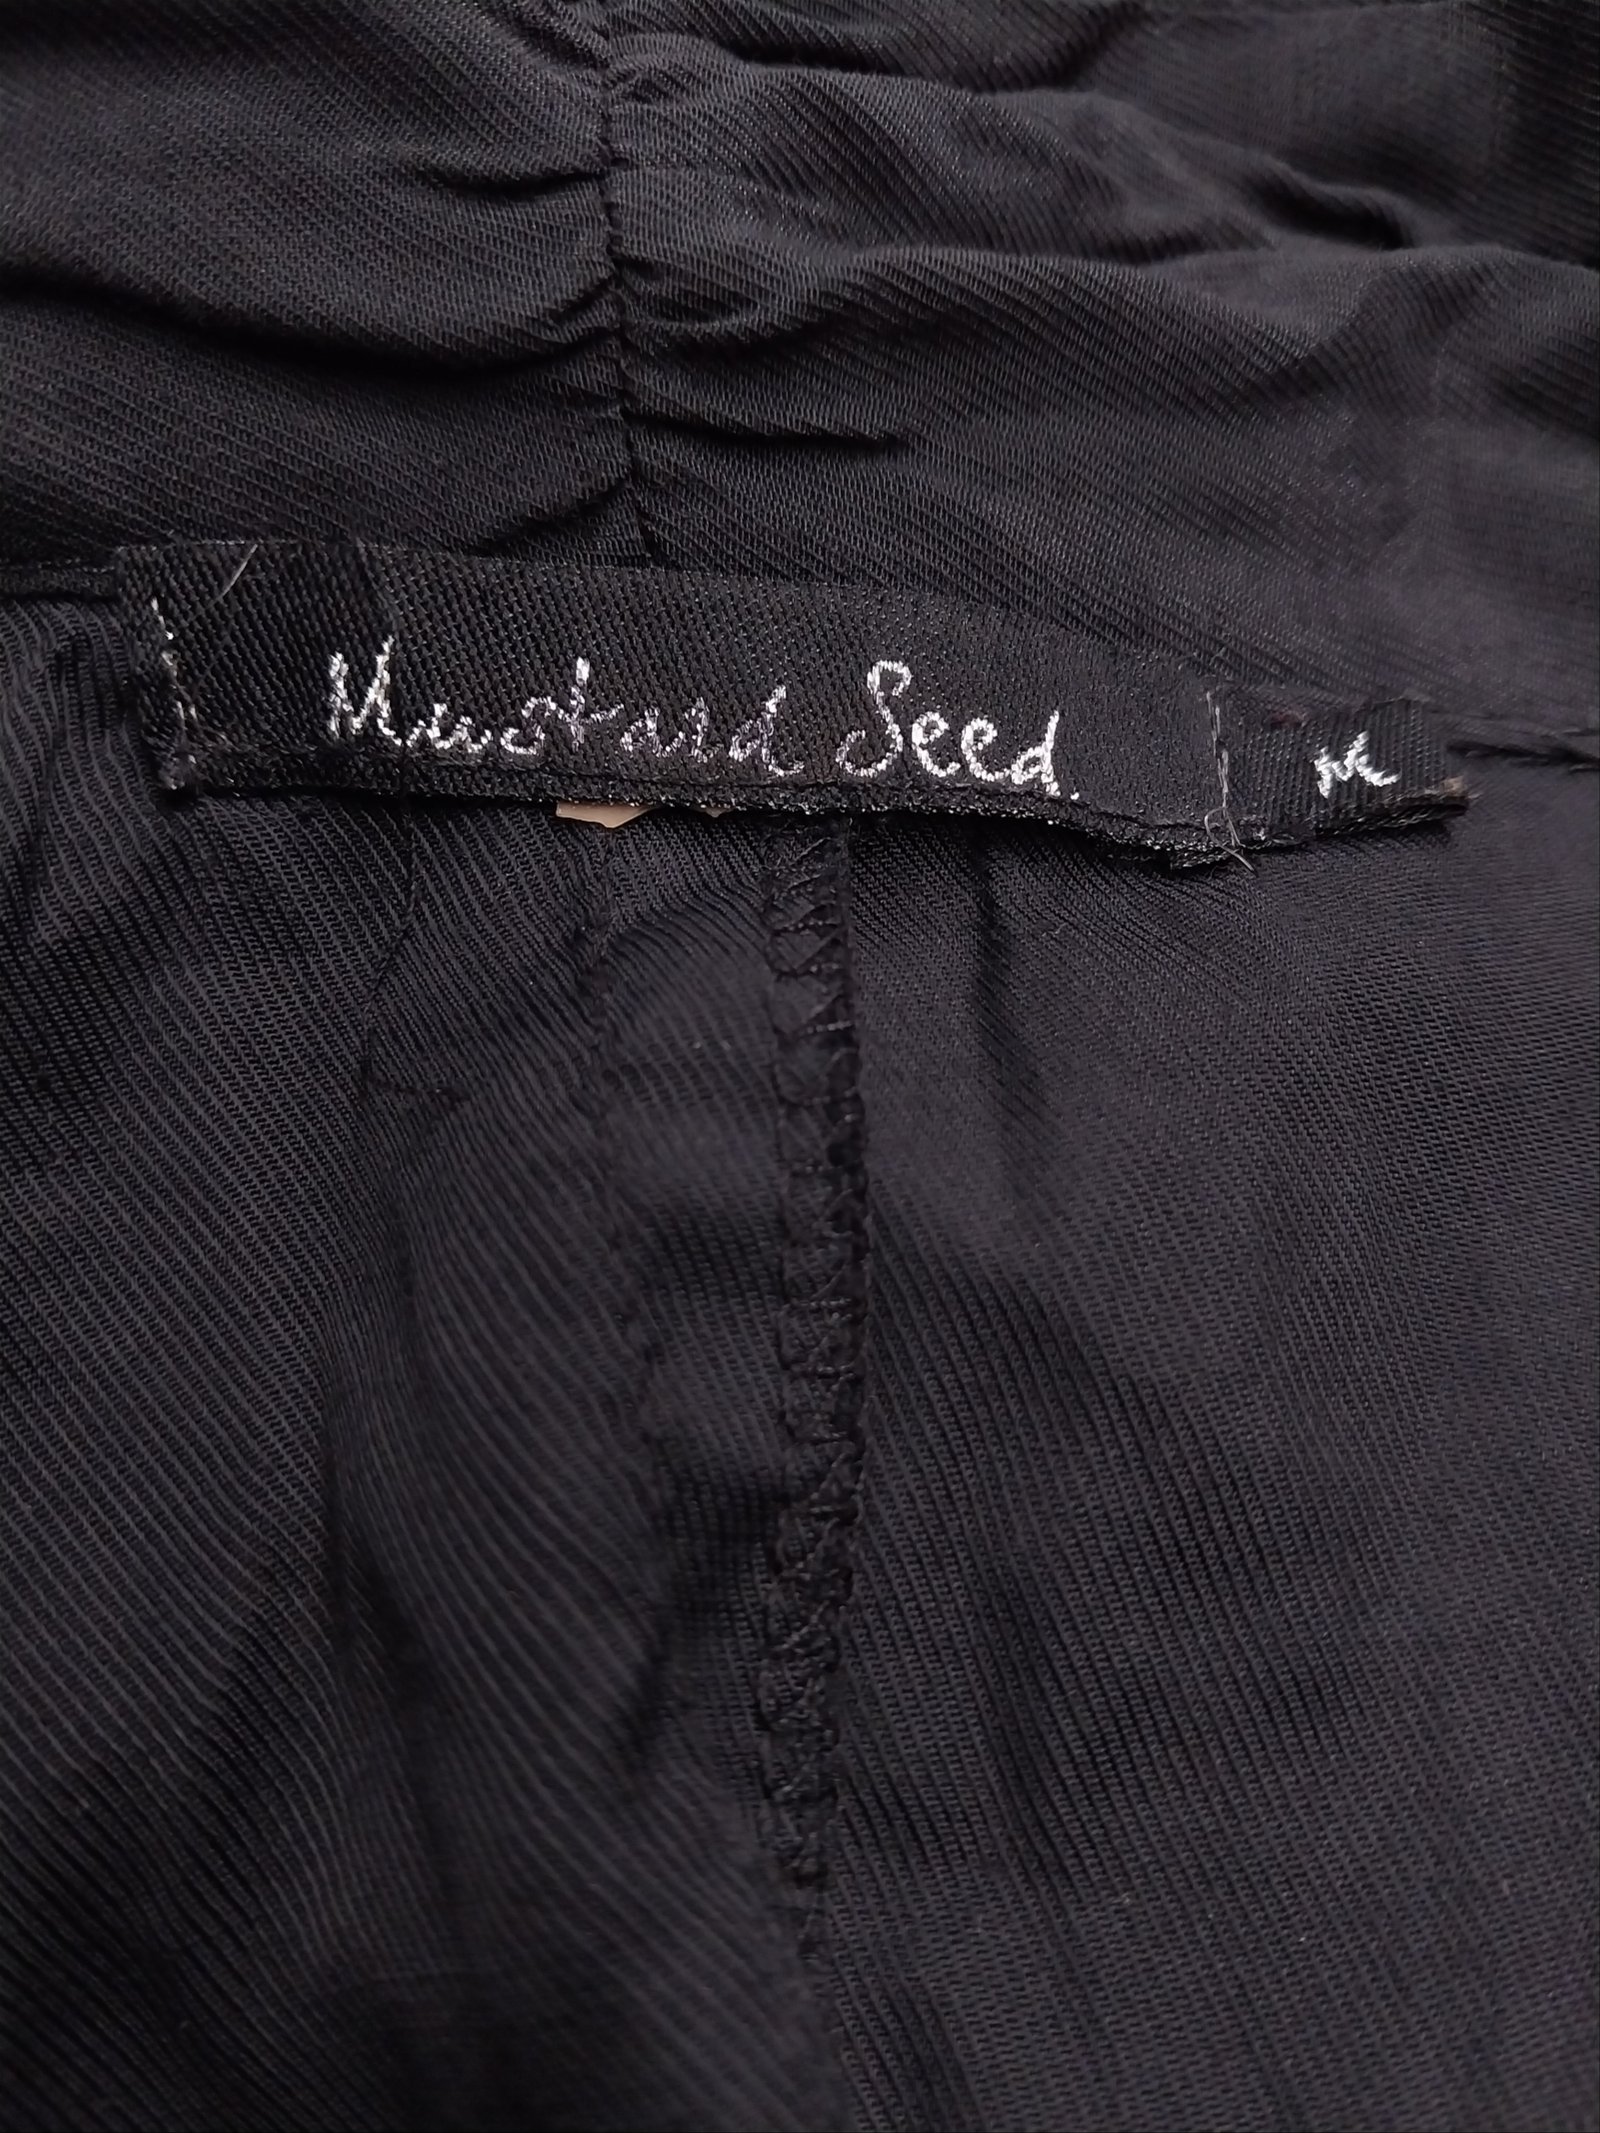 Blusas Casuales Mustard Seed